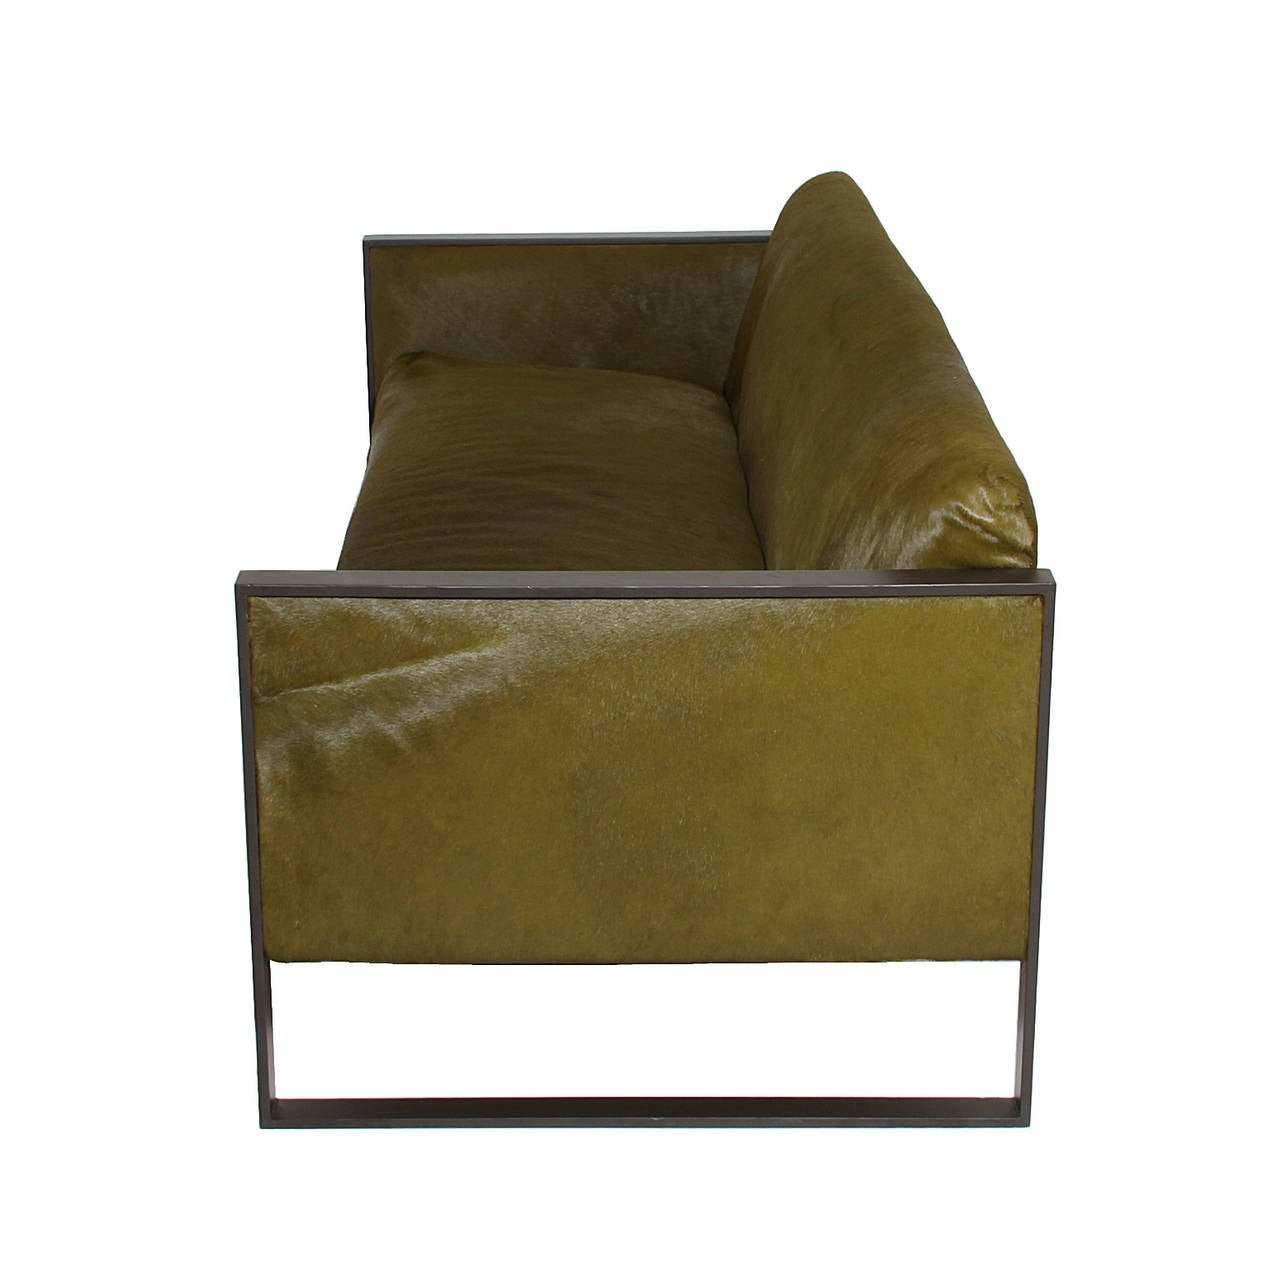 Milo Baughman Steel Flat Bar Sofa in Olive Green Pony Hair In Good Condition In Hollywood, CA